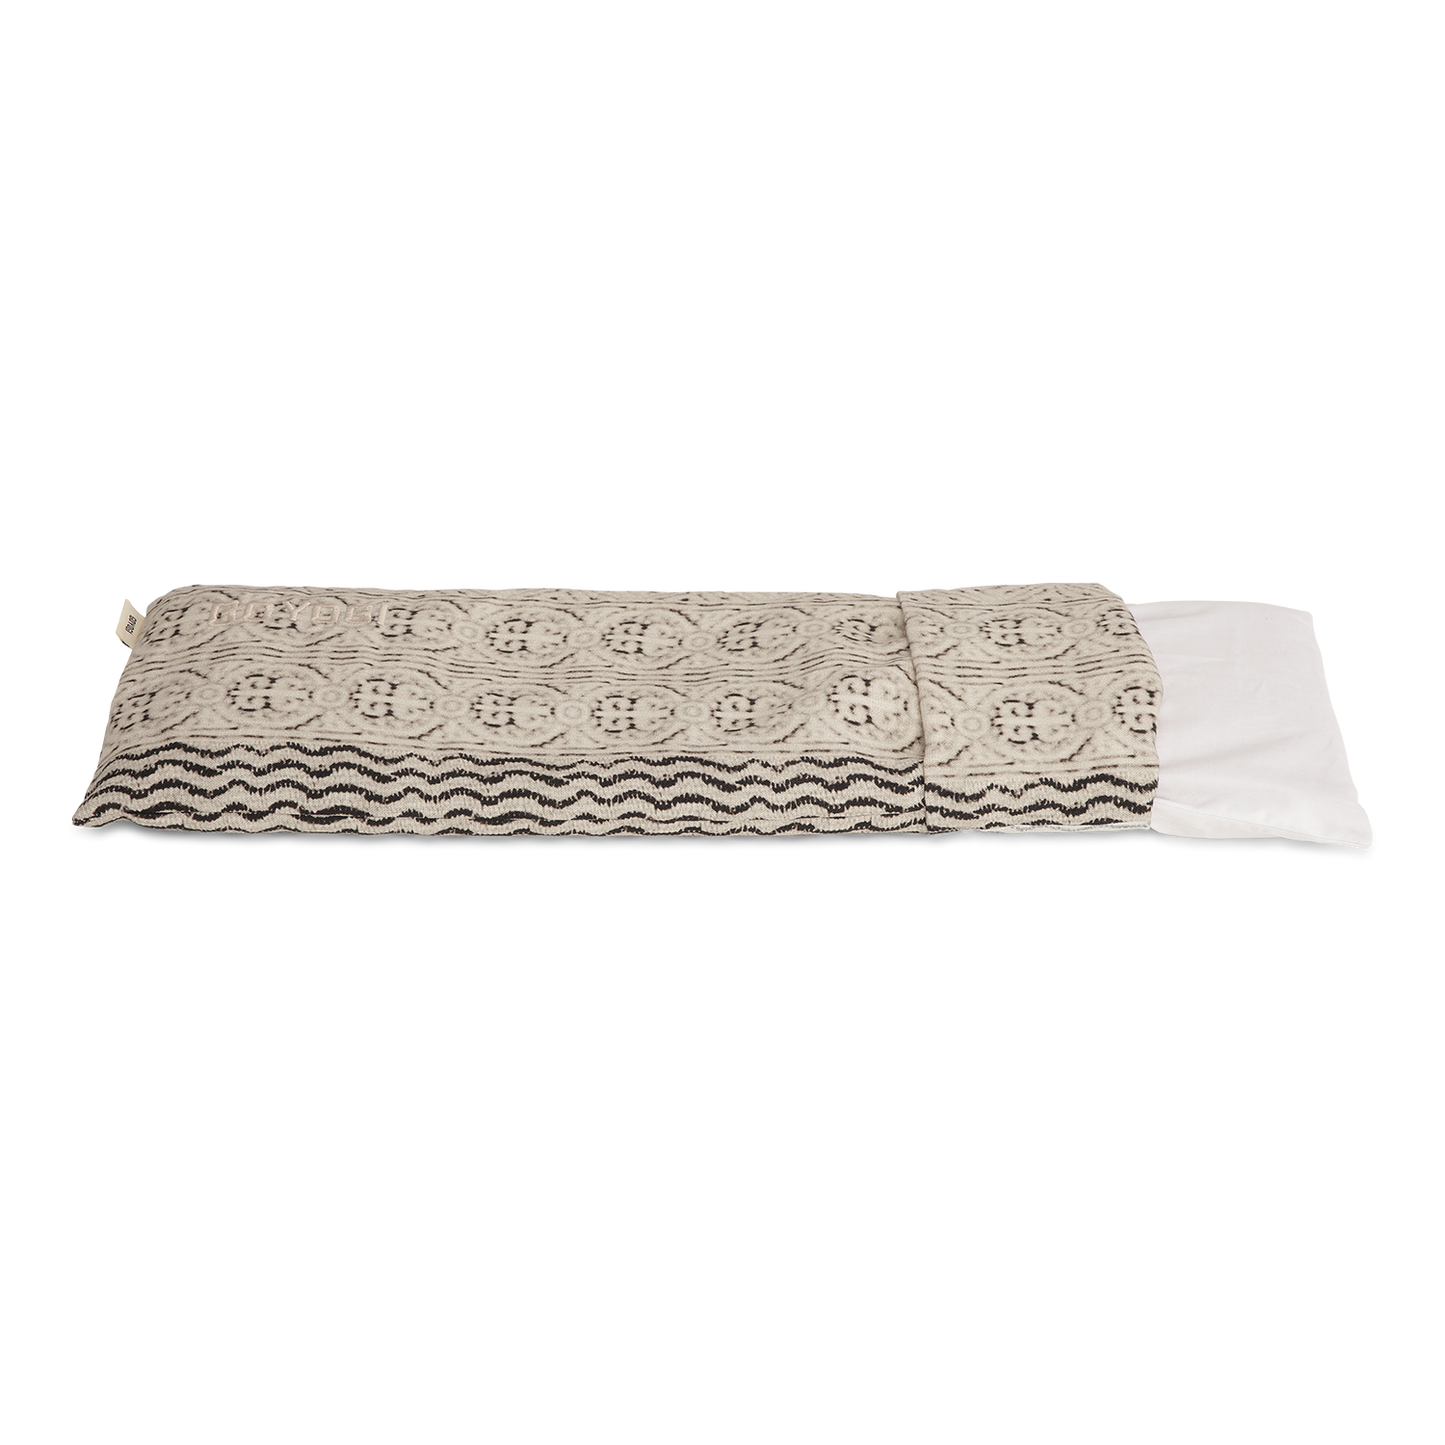 Mindful Linen Therapy Pillow - Black & Beige